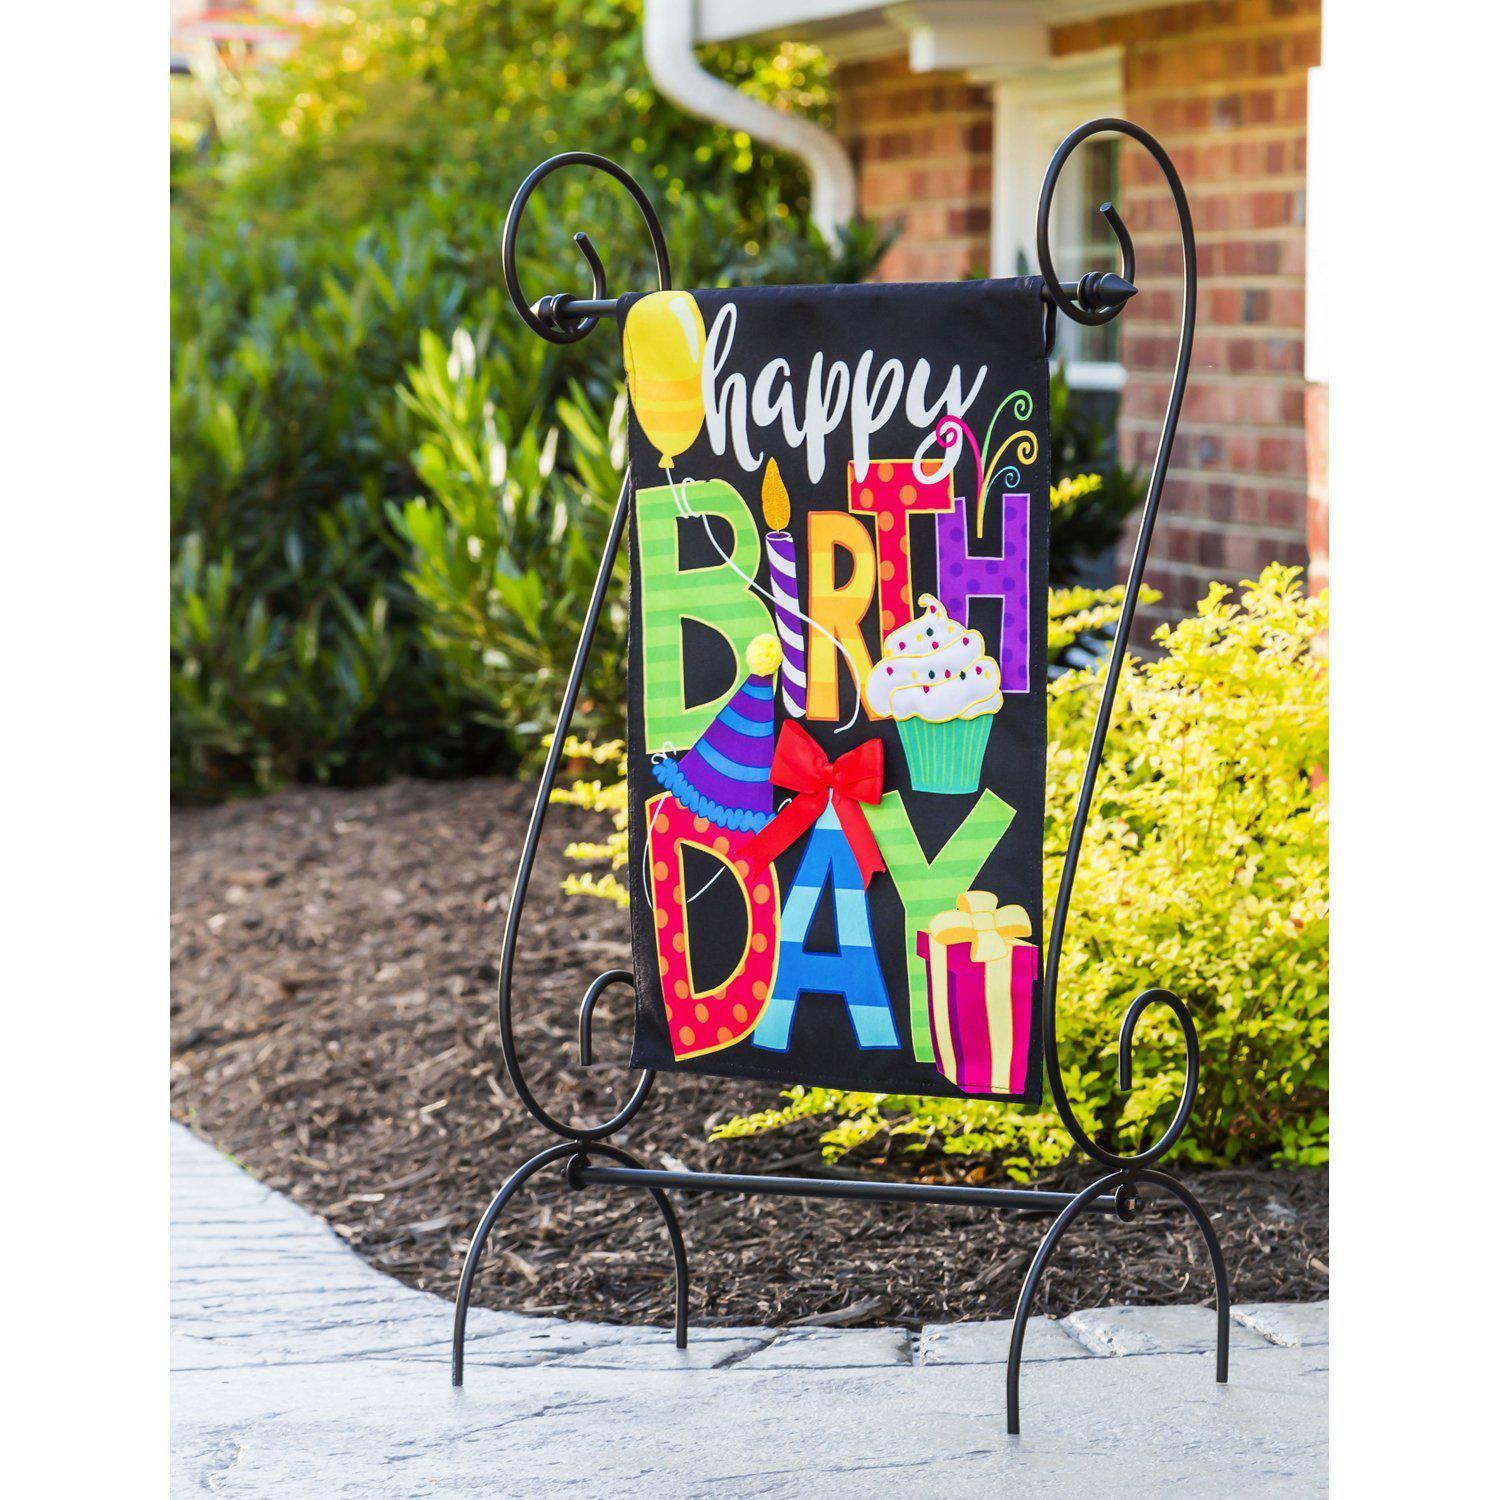 The two-sided Happy Birthday garden flag features a balloon, cupcake, candle, bow, presents, and the words "Happy Birthday"!